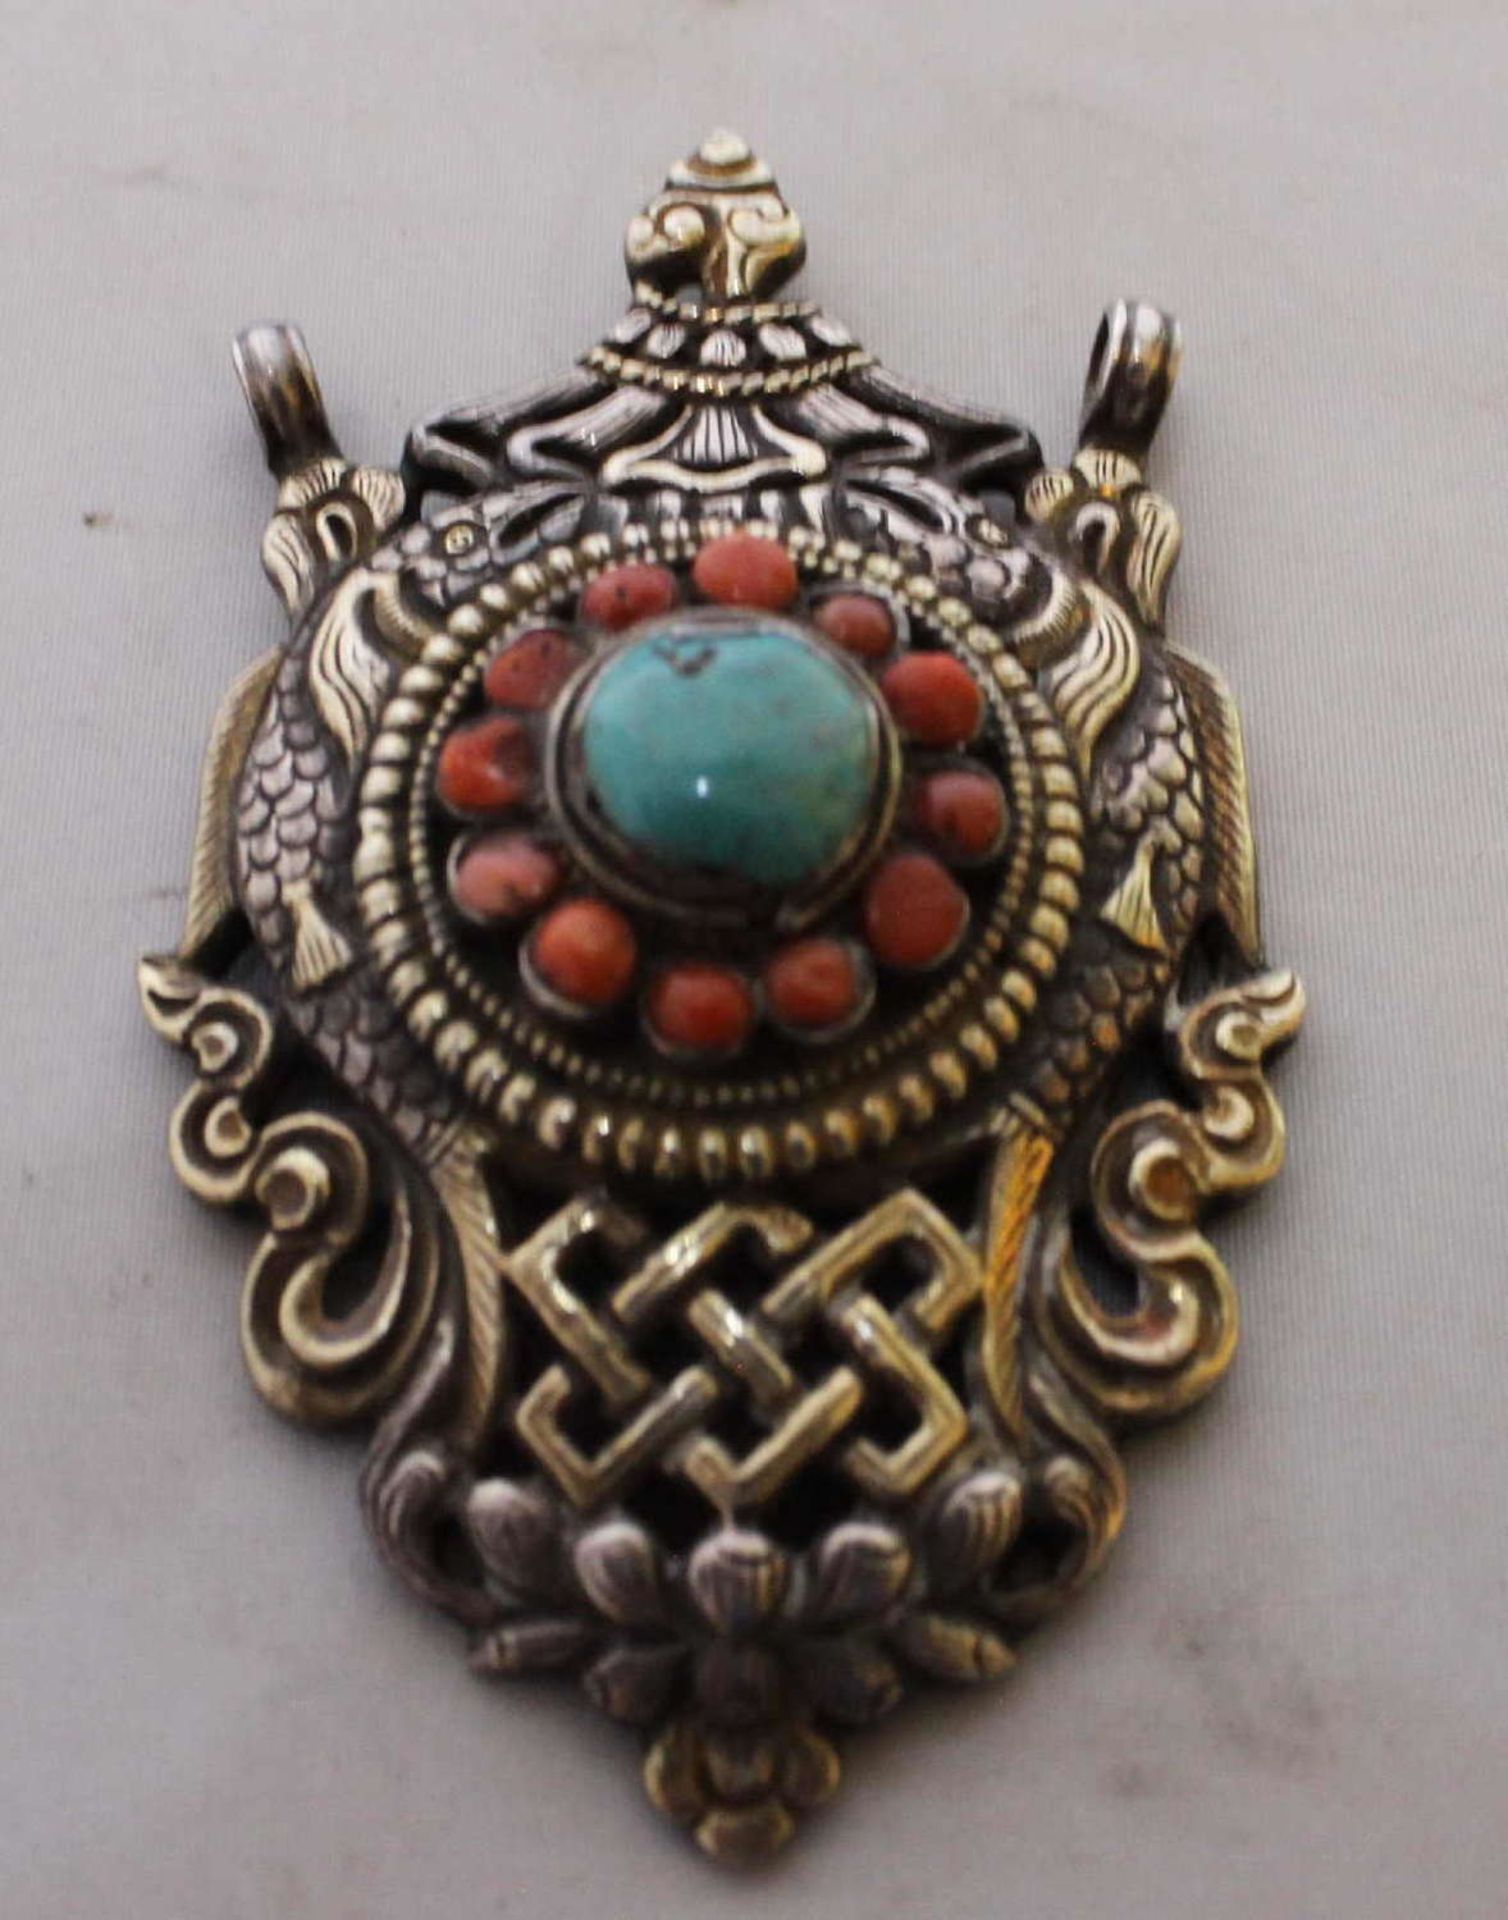 fancy silver pendant set with coral and turquoise. Great look!